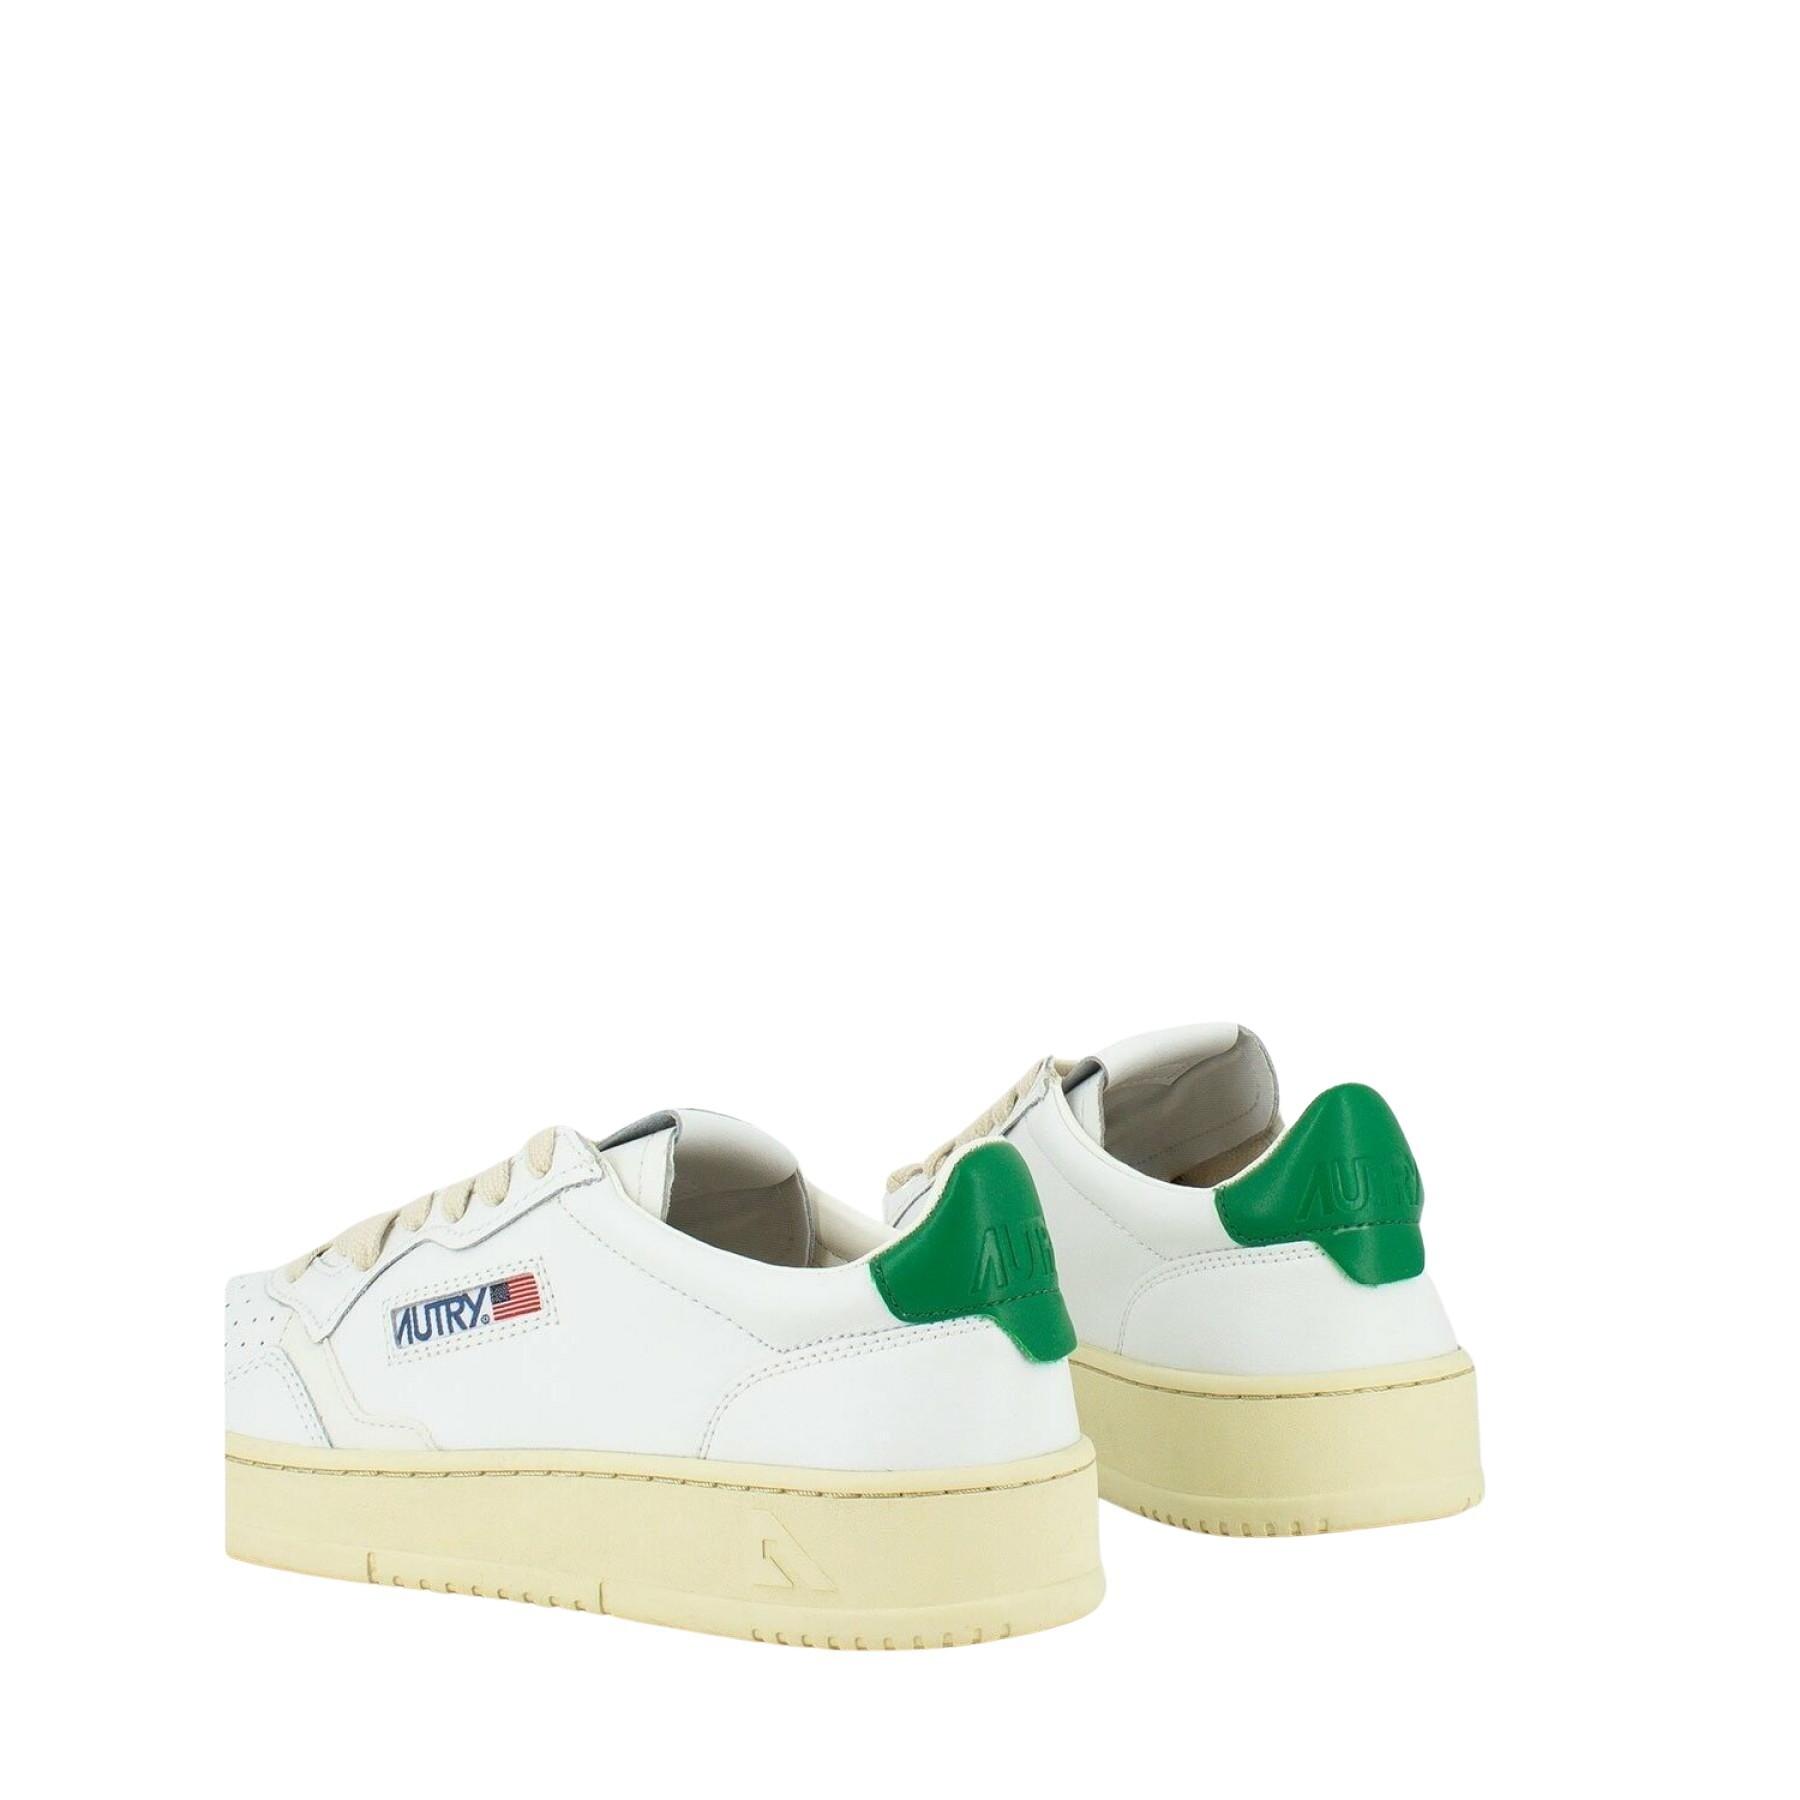 Trenerzy Autry Medalist LL20 Leather White/Green